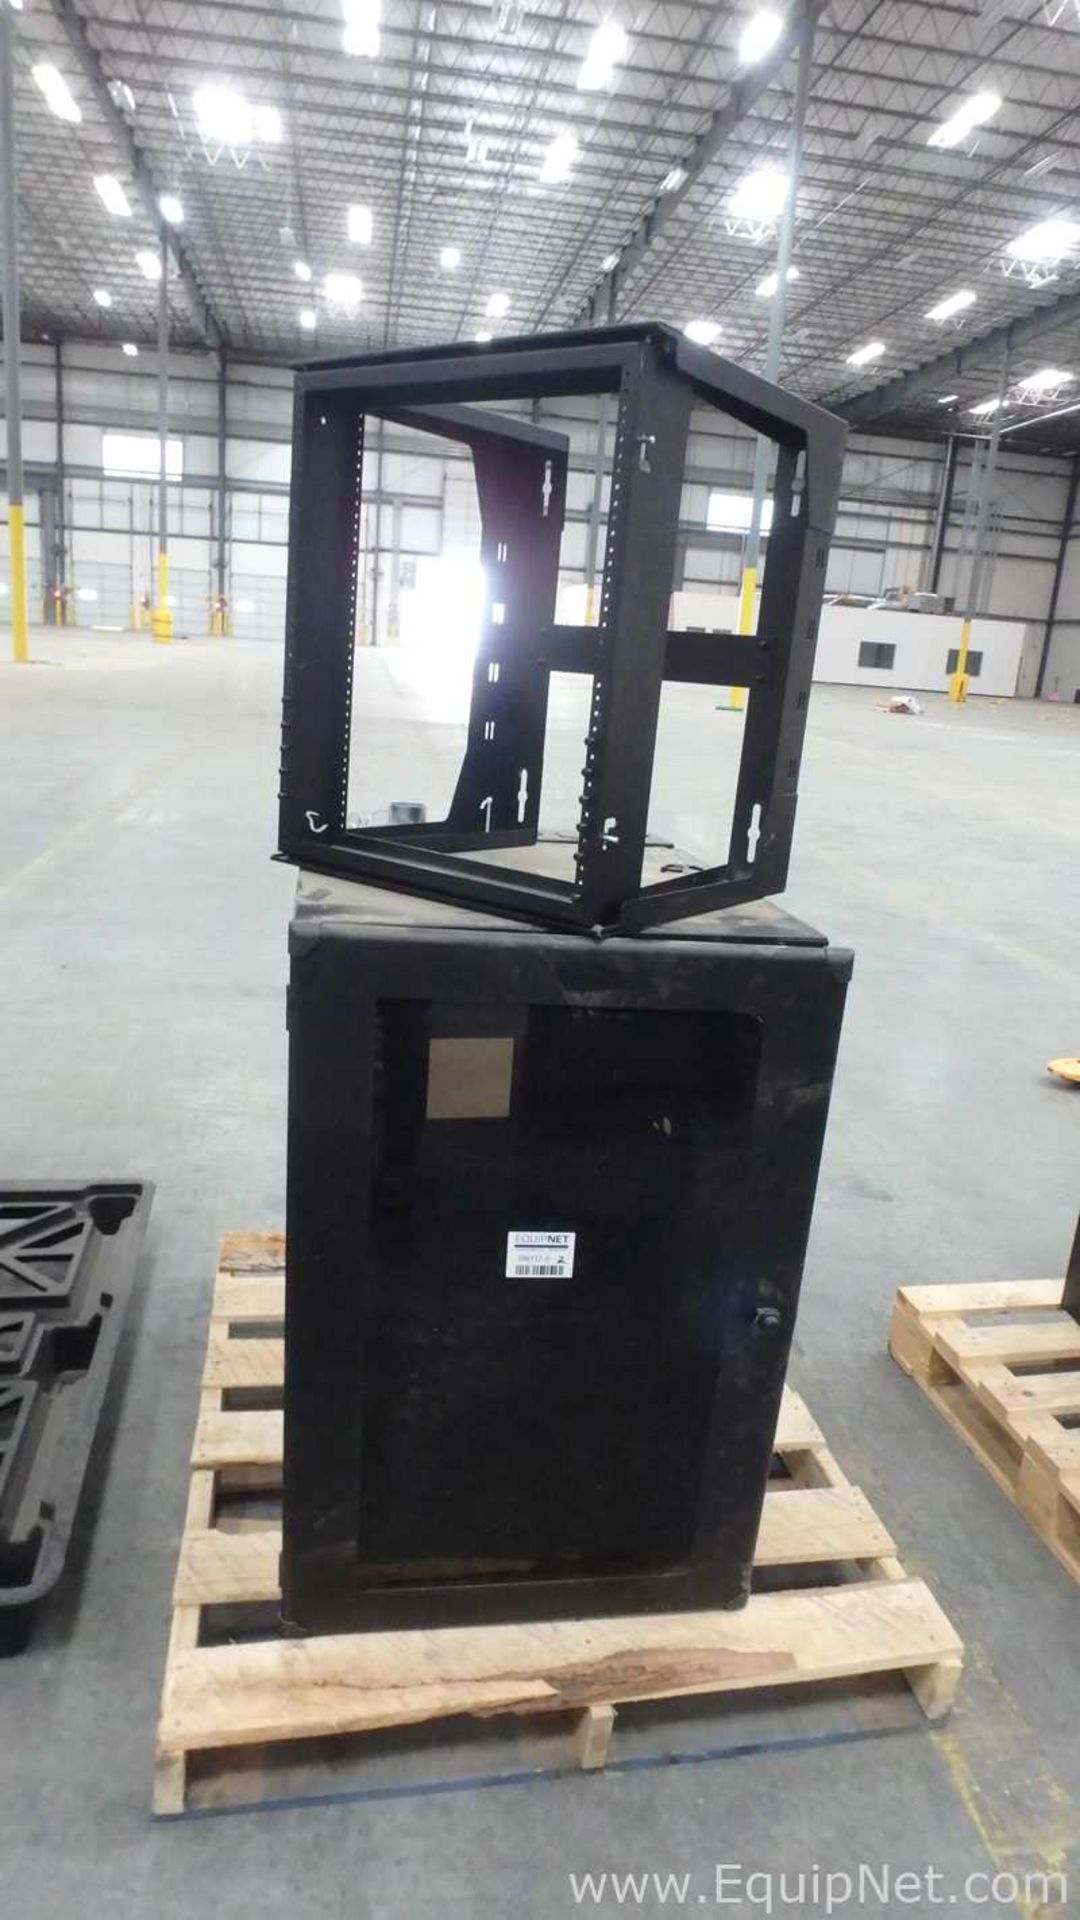 Lot of 3 Pallets With Server Box Stations - Image 3 of 6